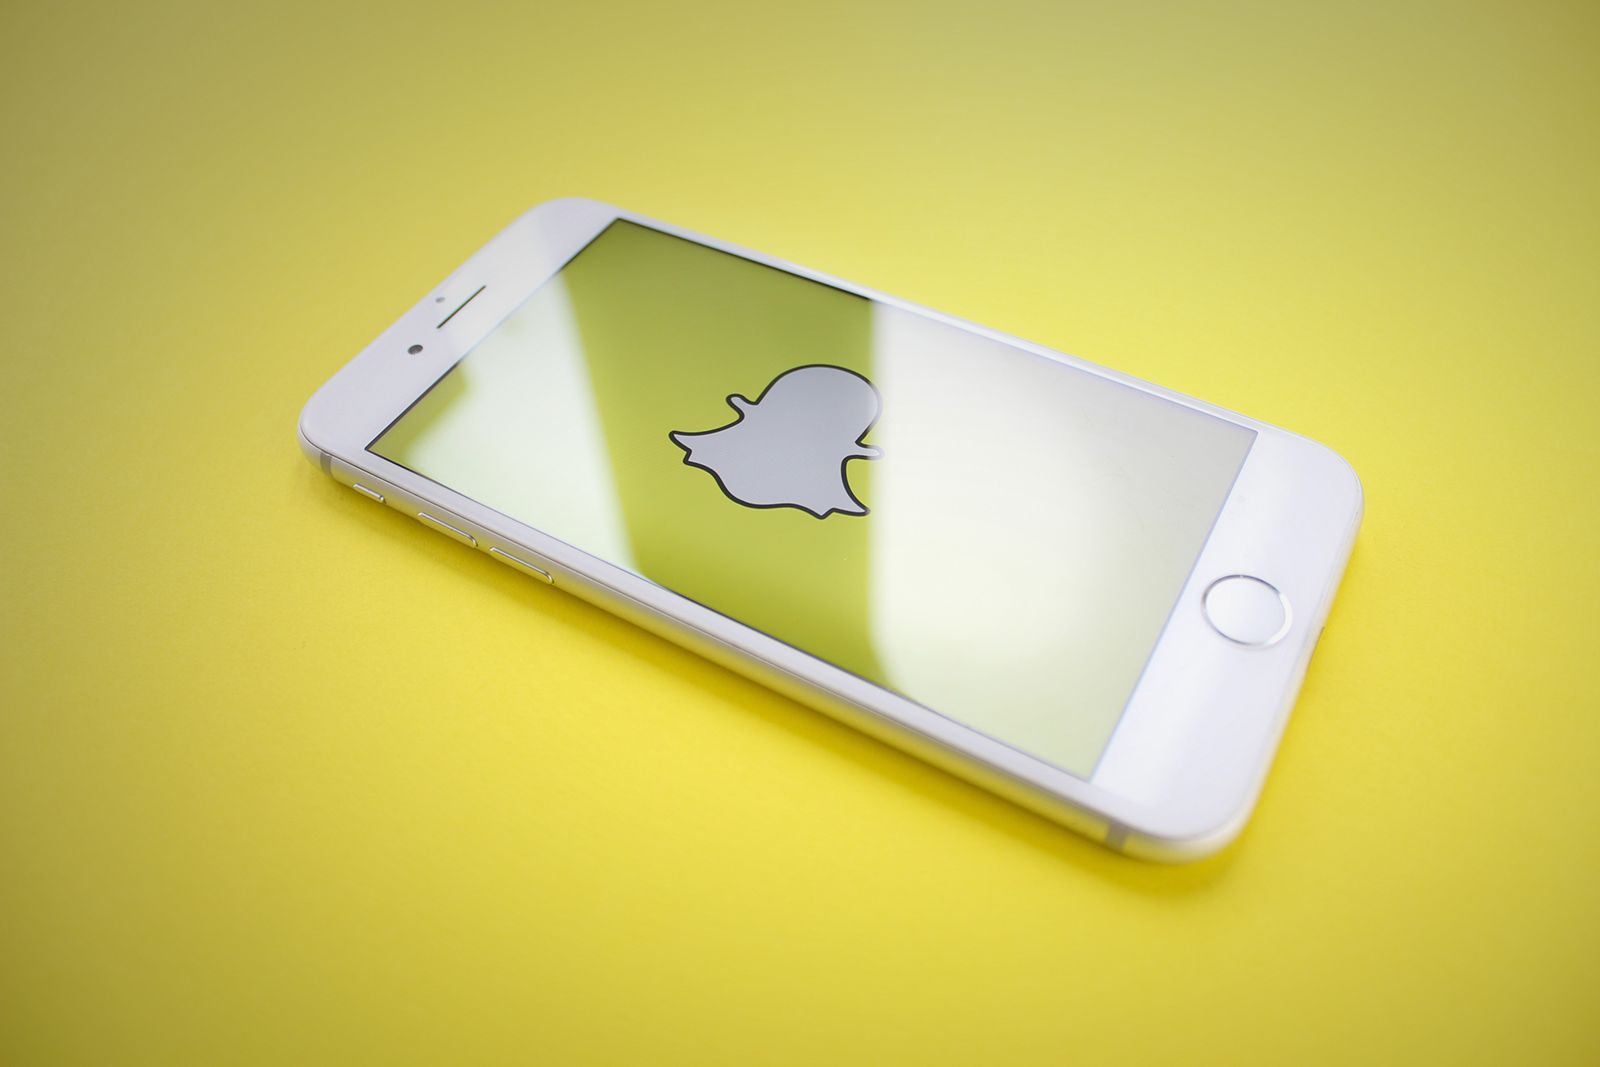 Snapchats controversial redesign caused it to hemorrhage users image 1